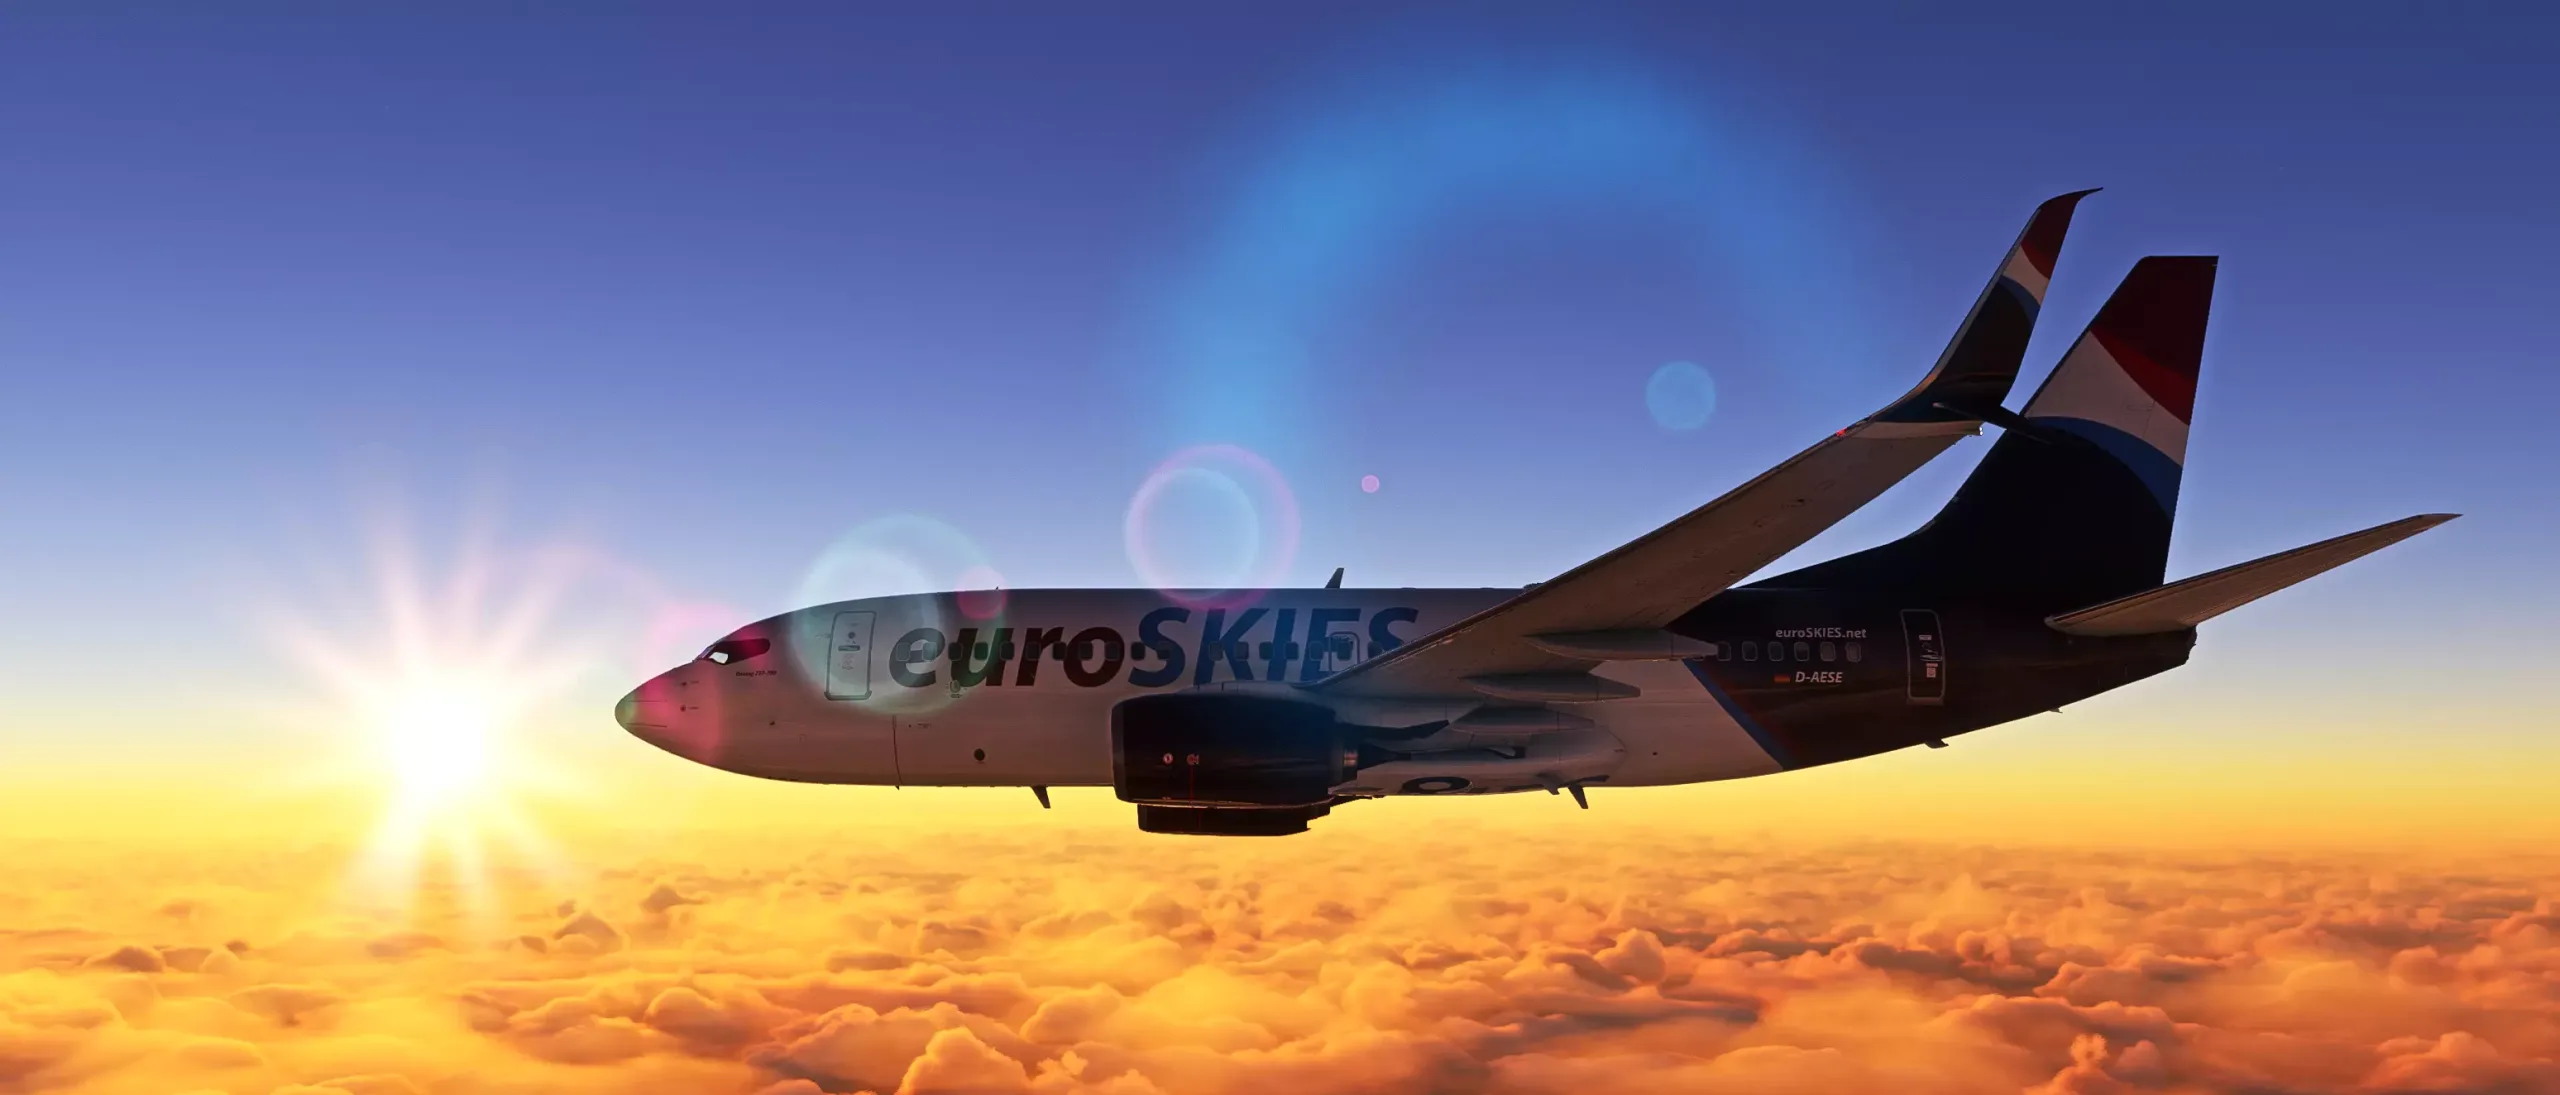 euroSKIES virtual airline Airbus A320 cloudsurfing on sunset 